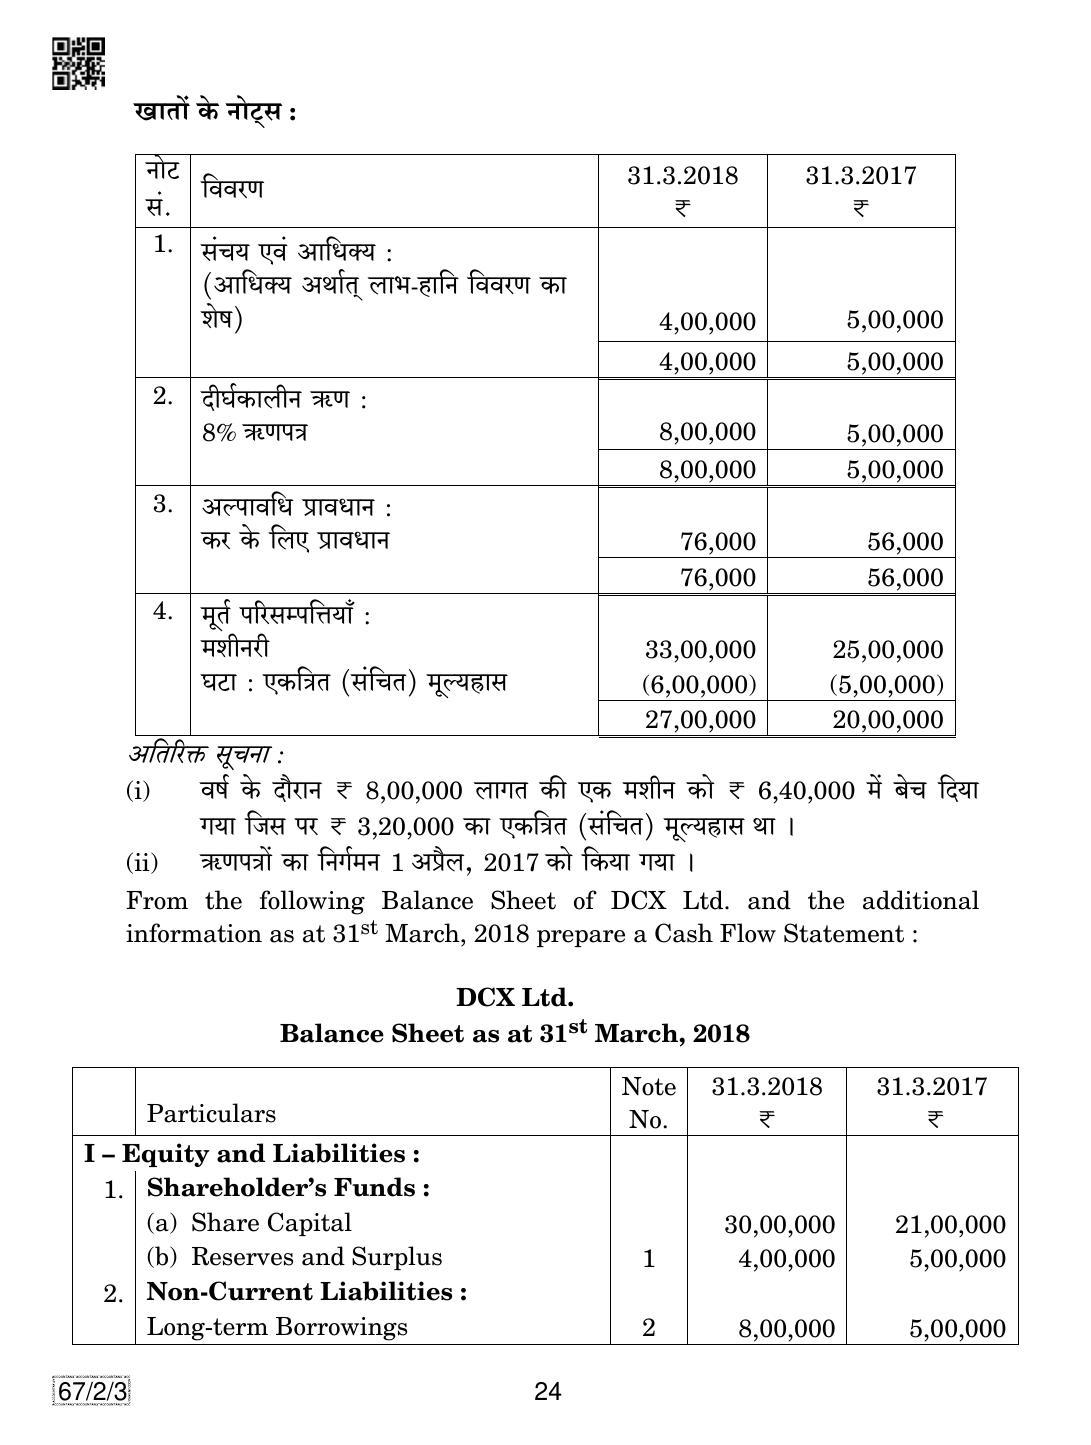 CBSE Class 12 67-2-3 Accountancy 2019 Question Paper - Page 24